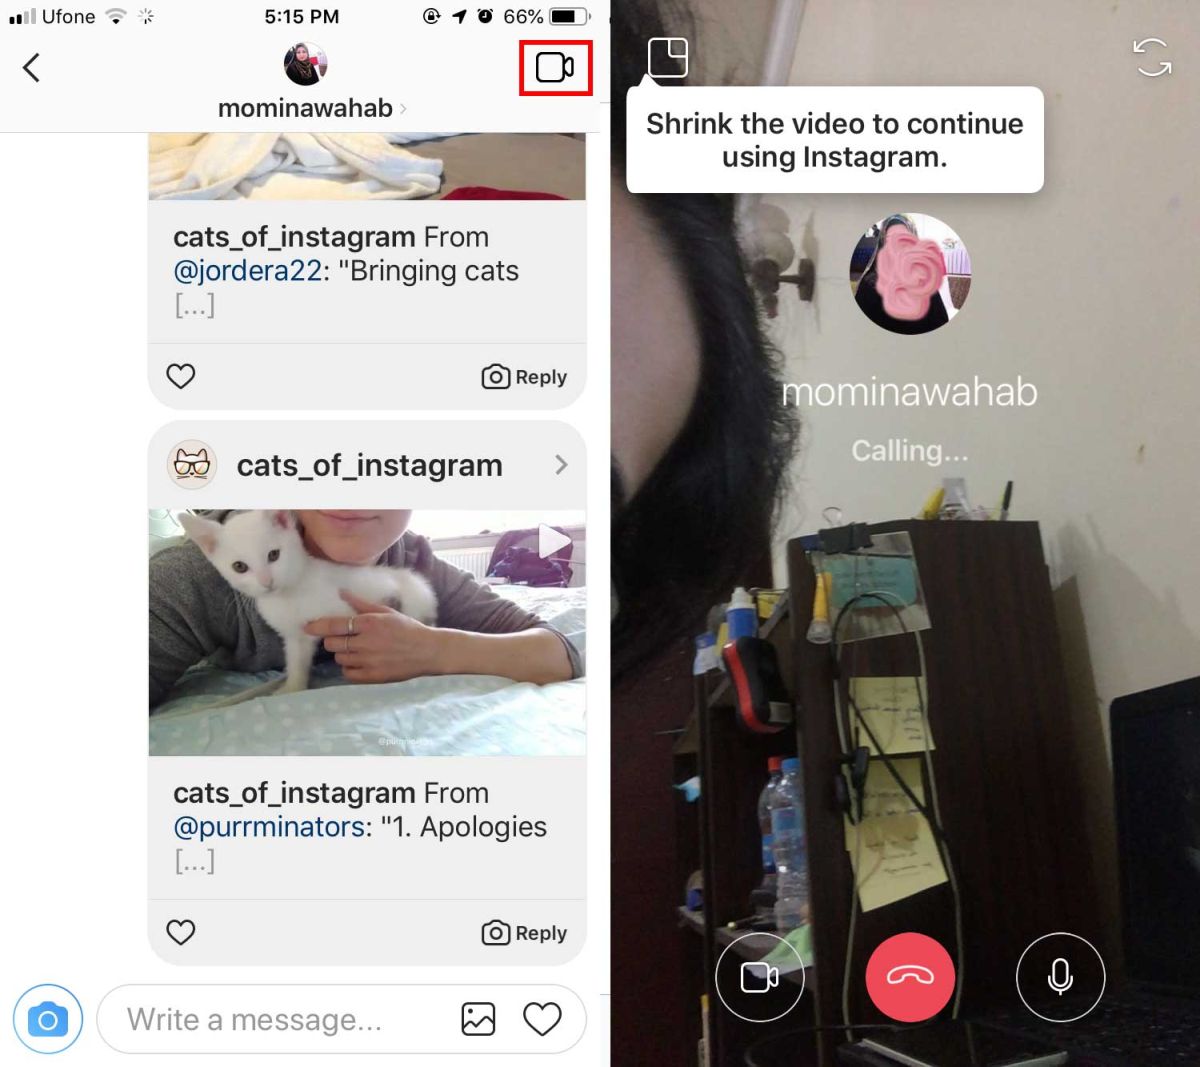 How To Make A Video Call On Instagram